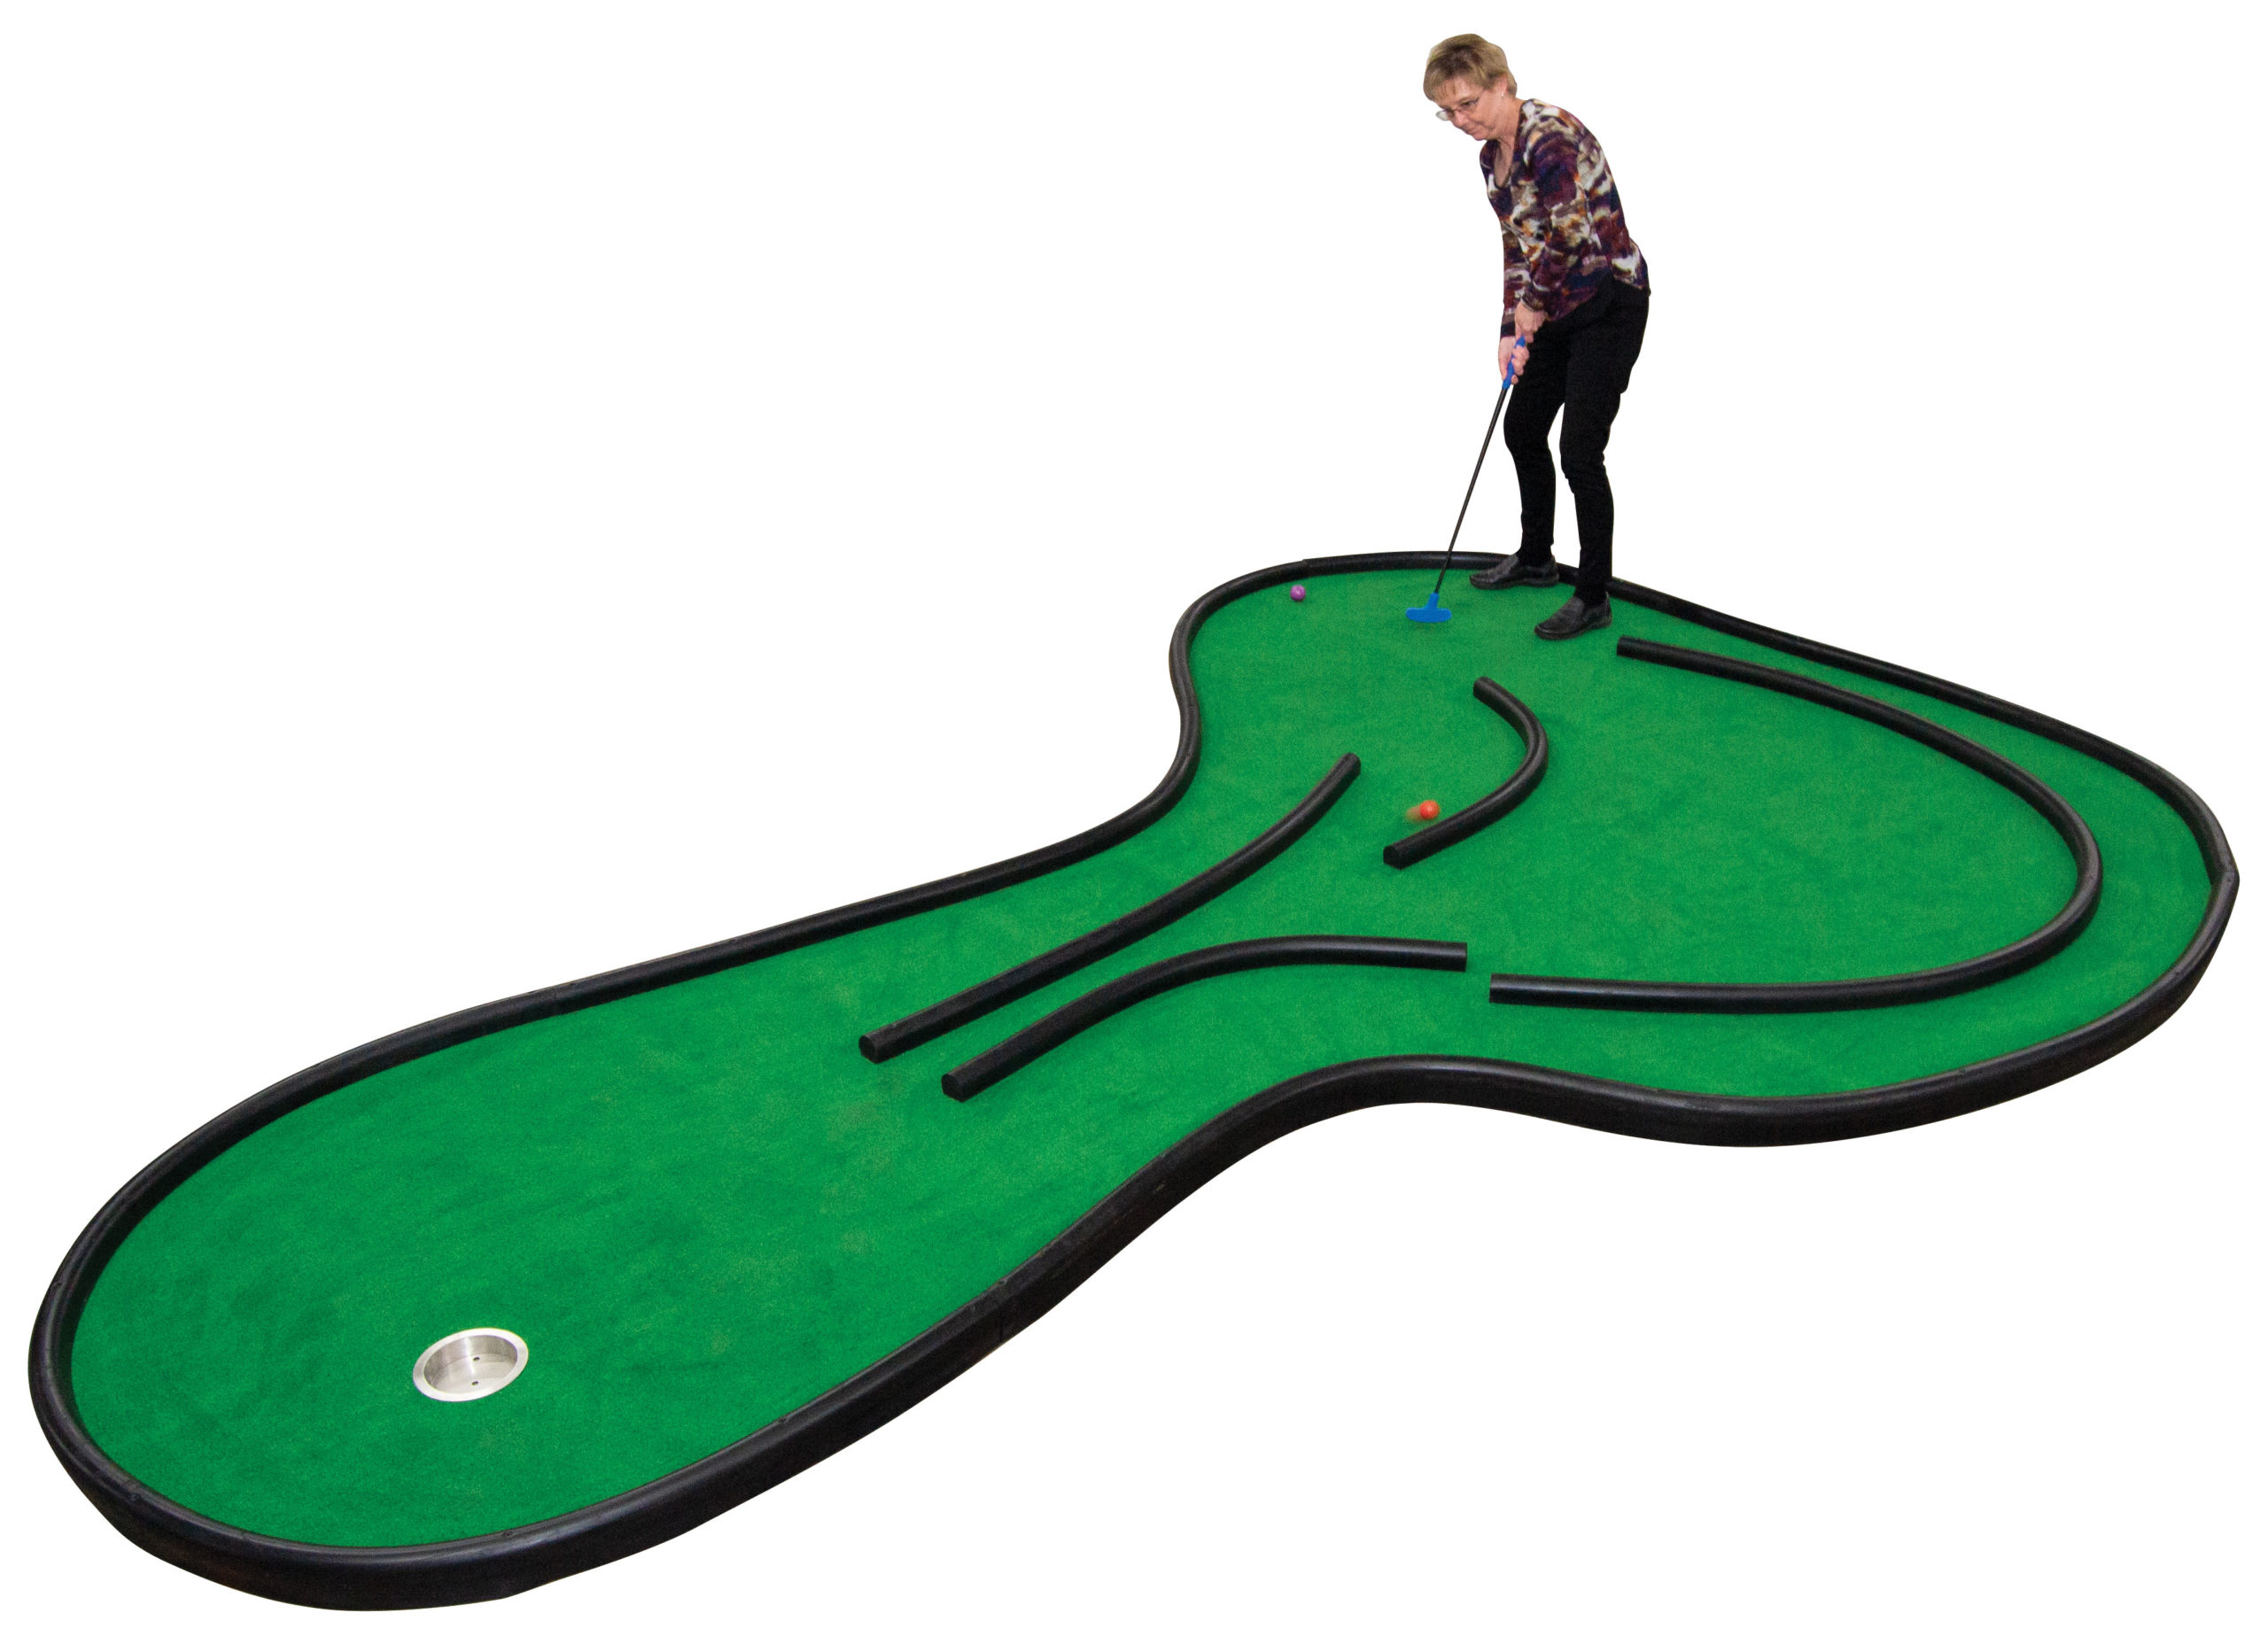 Play putts along one of four curved rubber “edges” that offer different paths to the mini golf hole